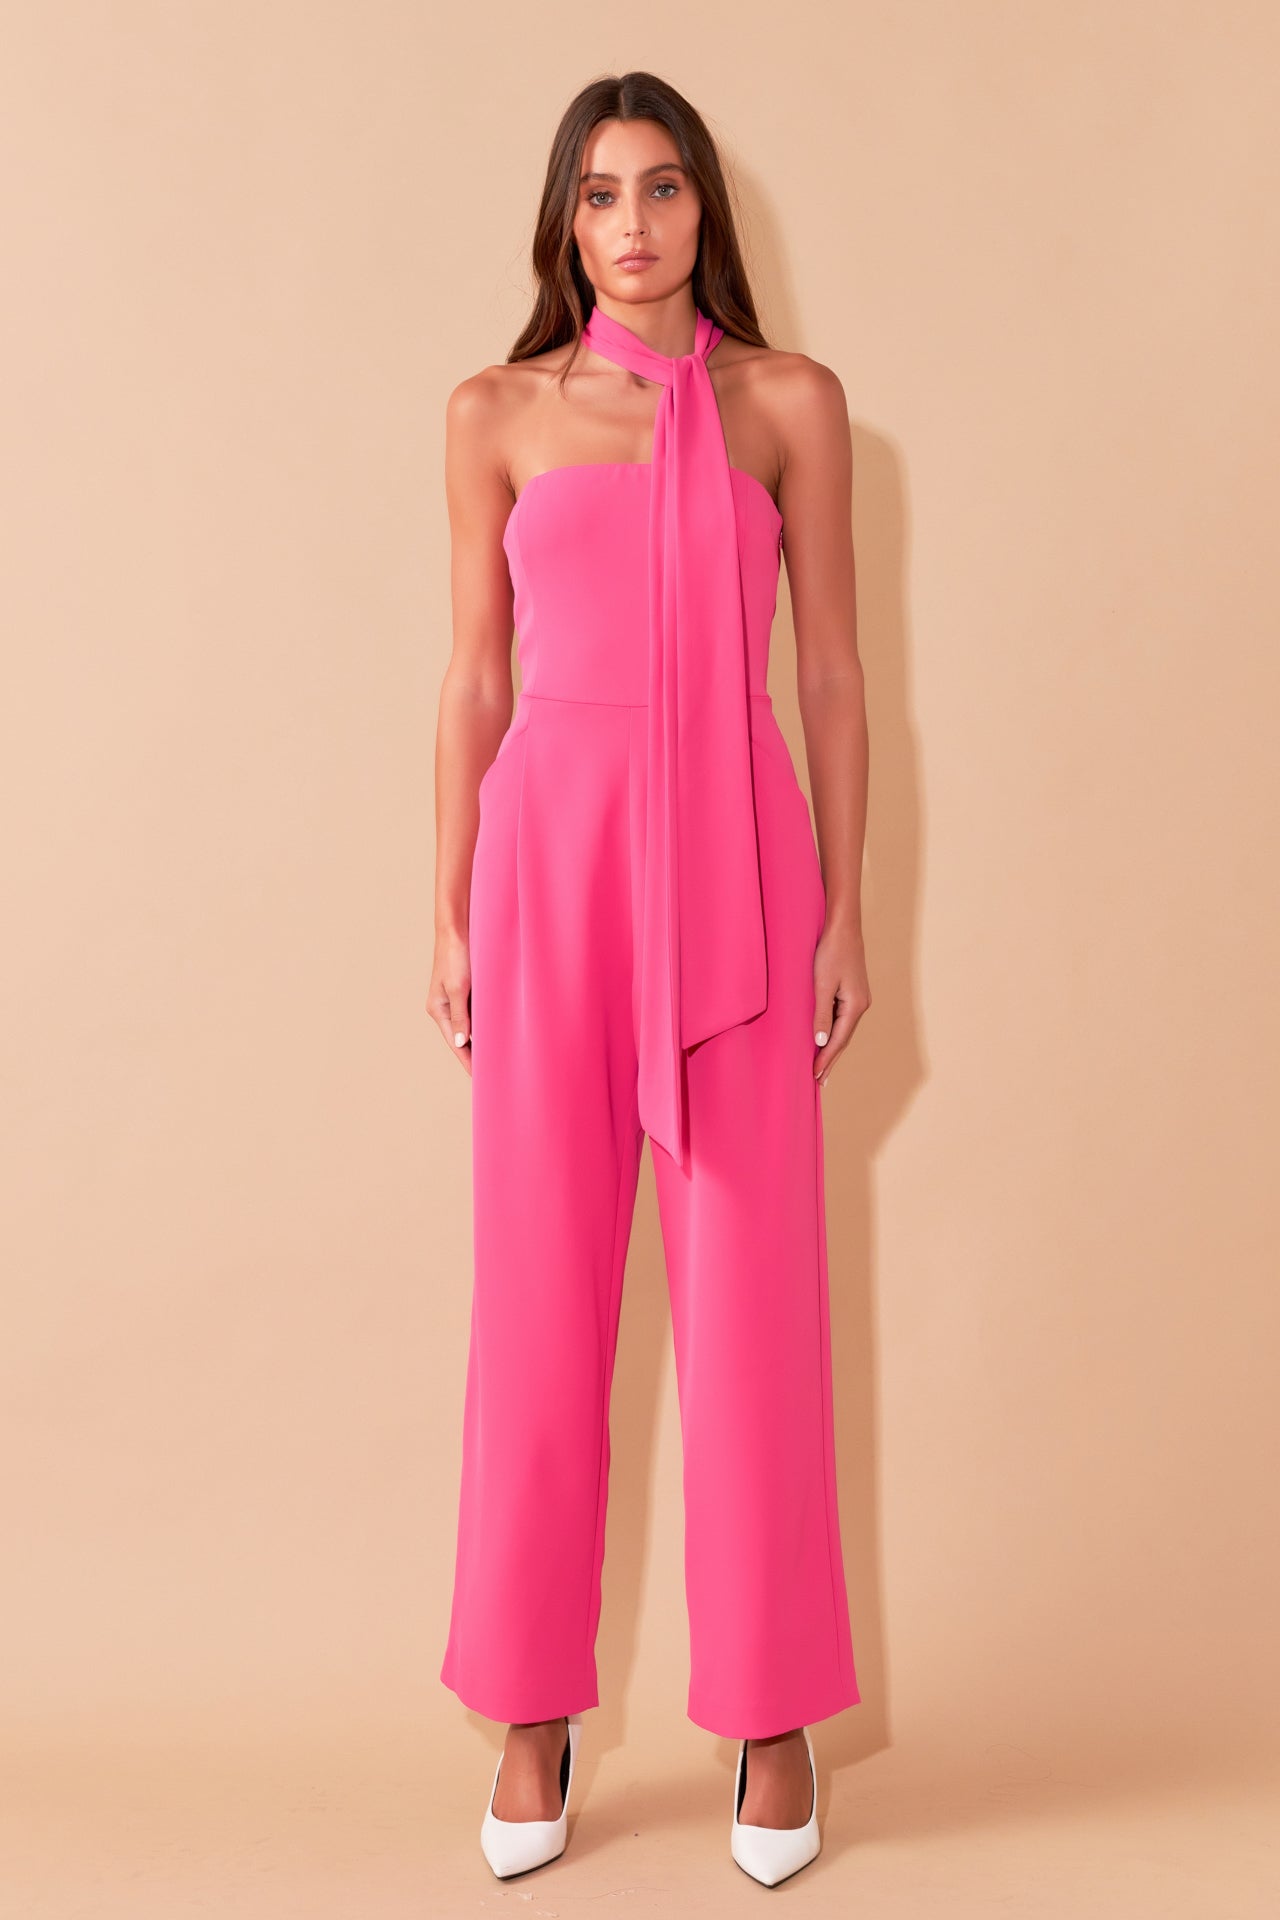 Endless Rose - Front Tie Strapless Jumpsuit - Jumpsuits in Women's Clothing available at endlessrose.com